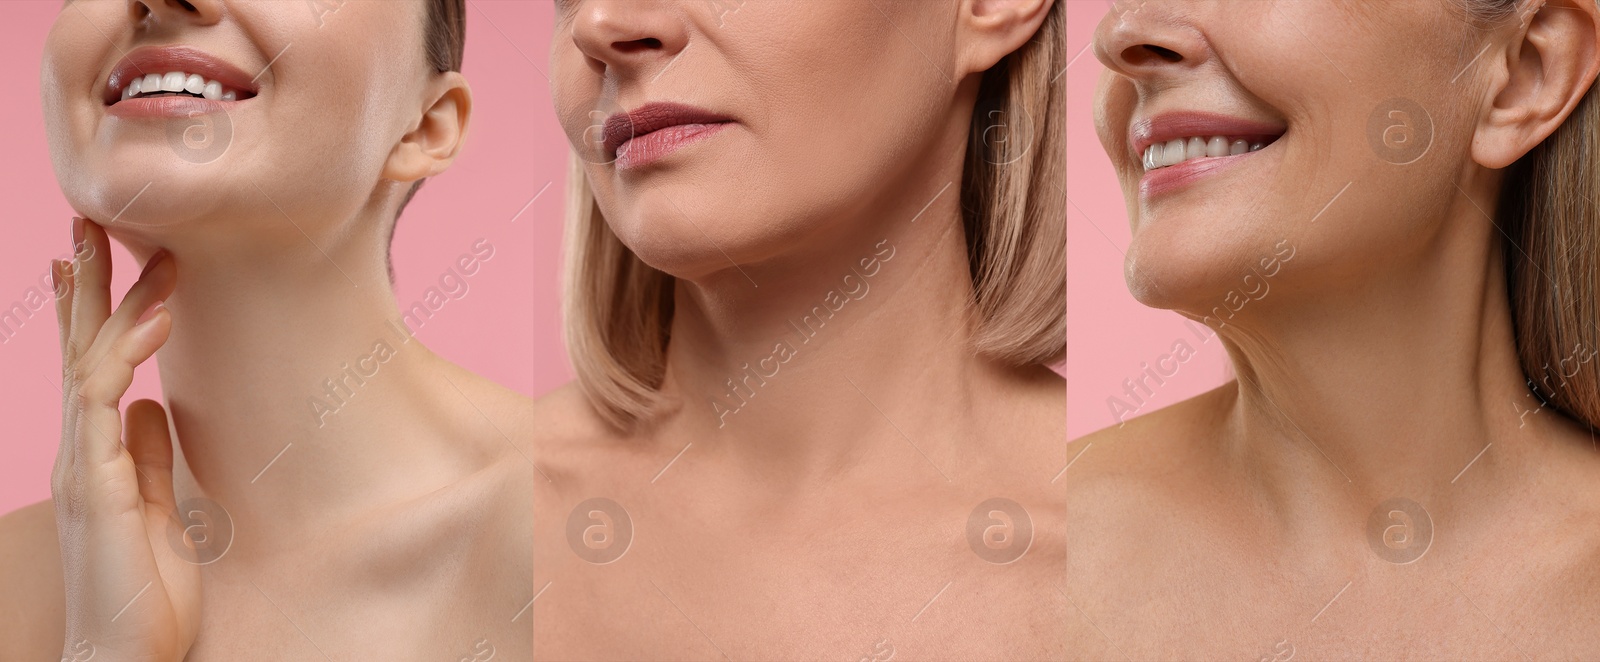 Image of Women with healthy skin on pink background, set of photos